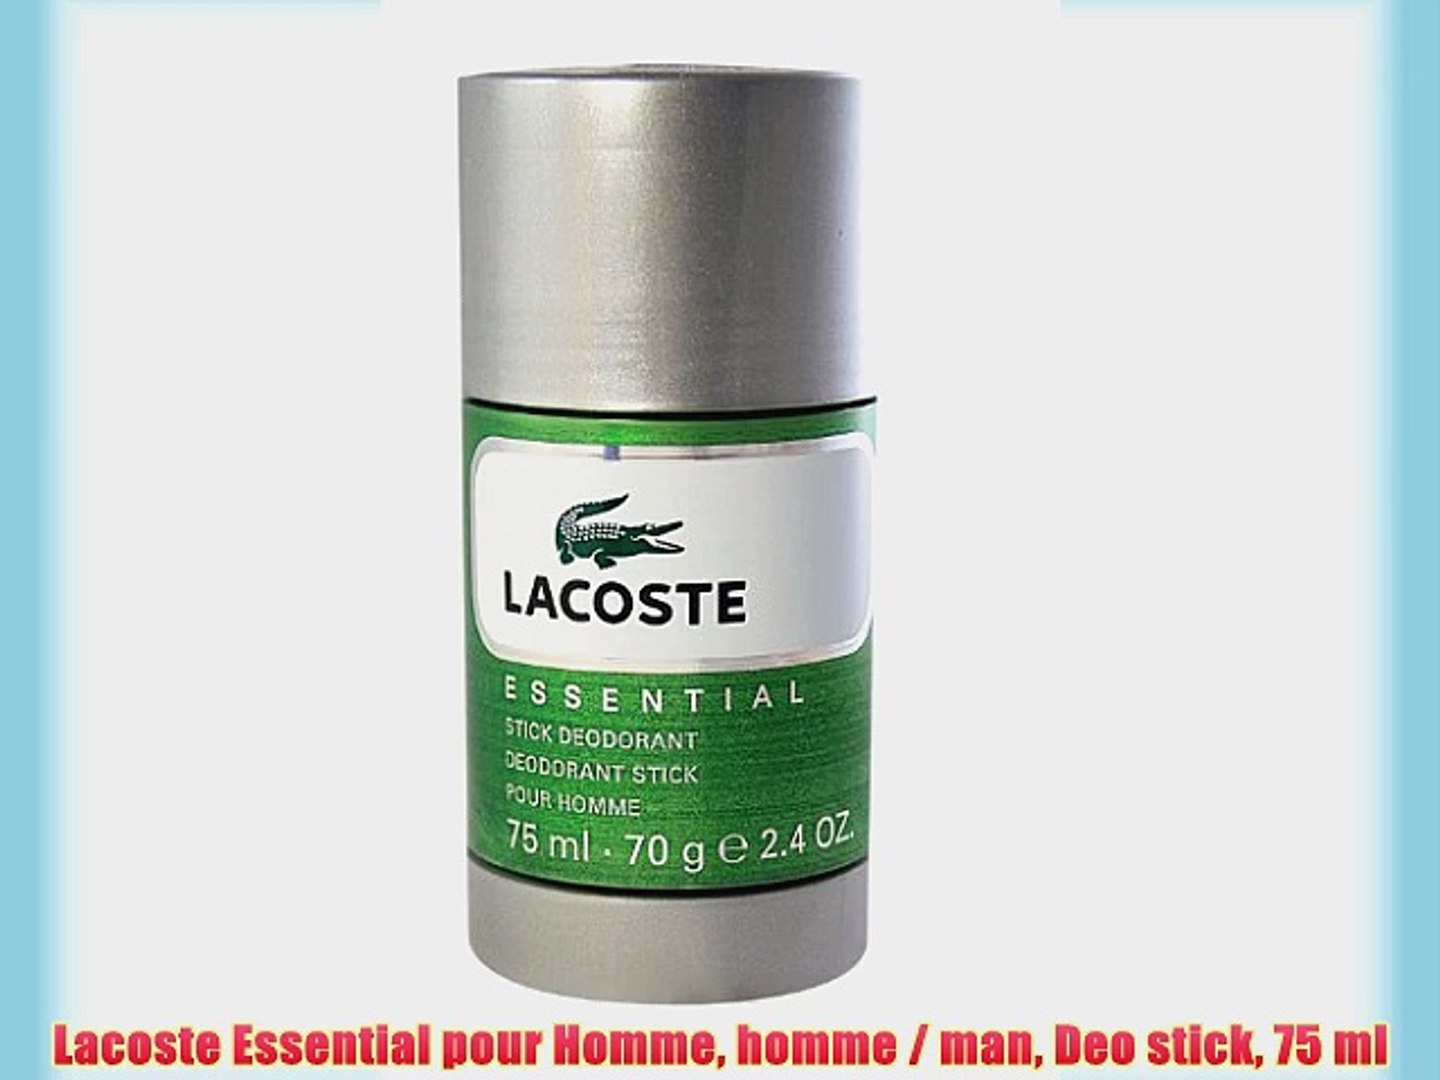 lacoste essential deostick